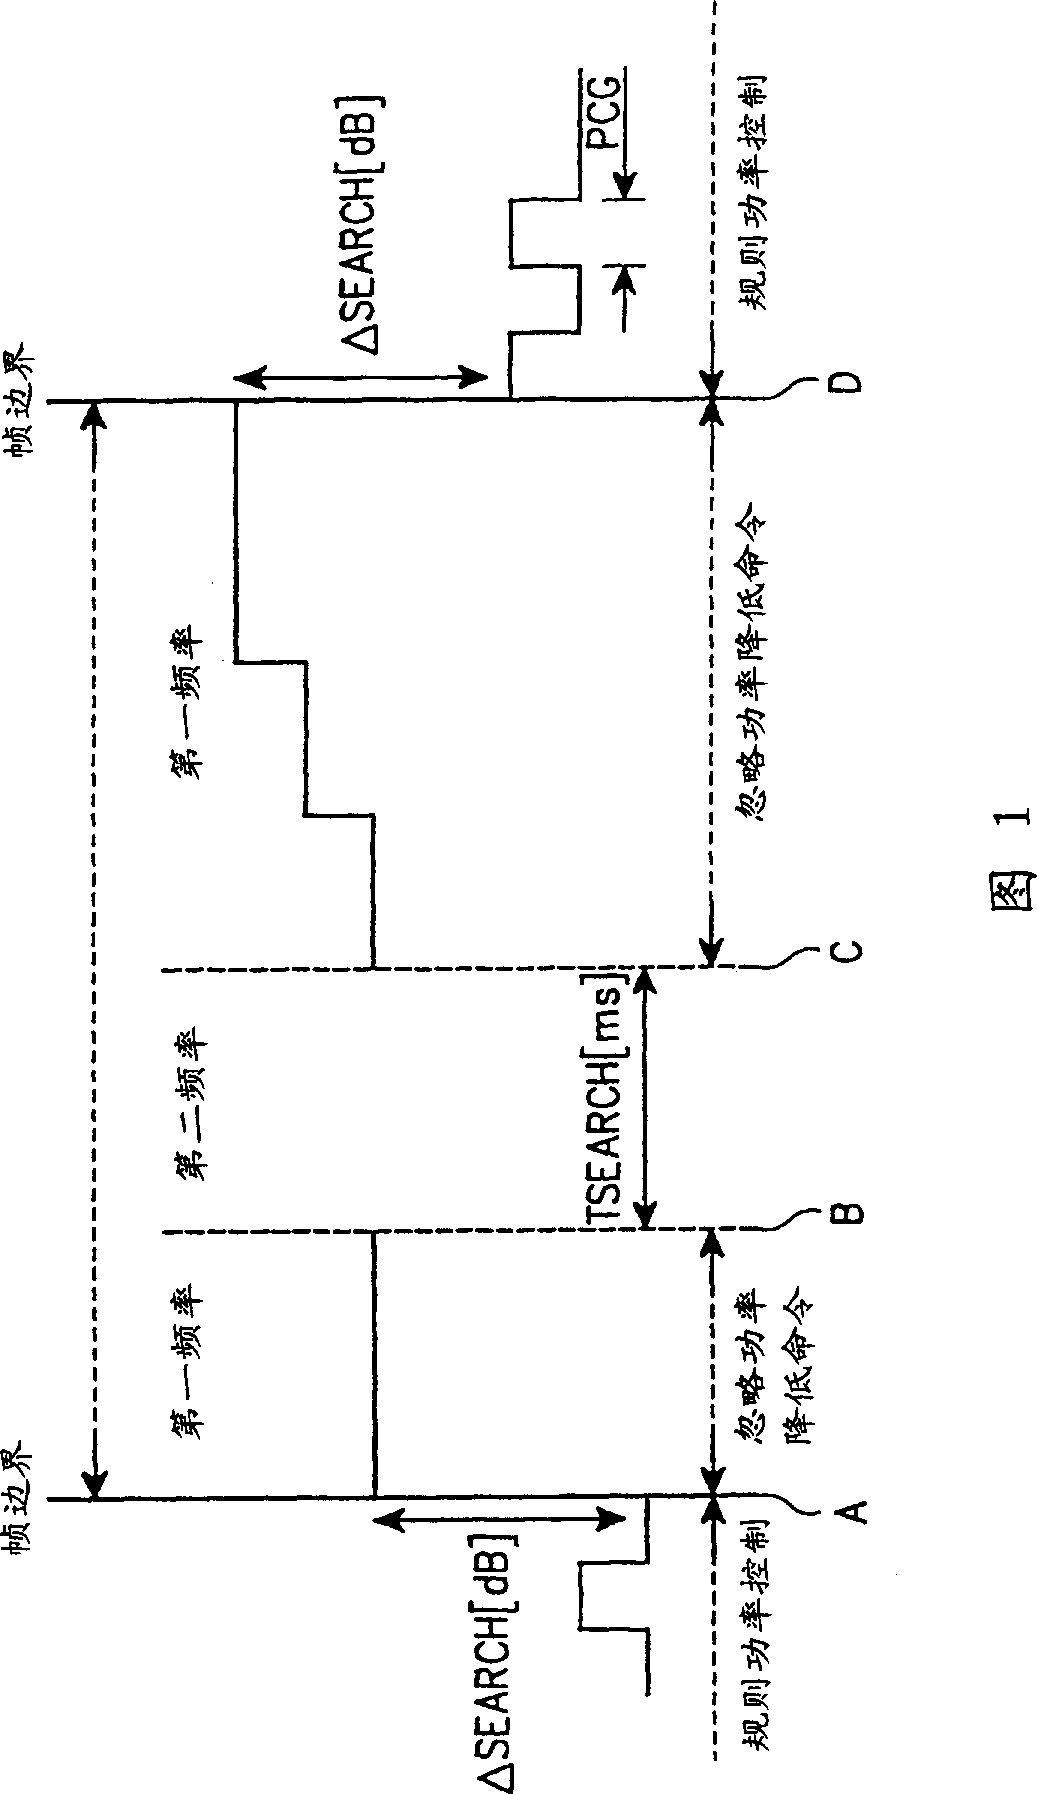 Power control apparatus and method for inter frequency handoff in cdma communication system